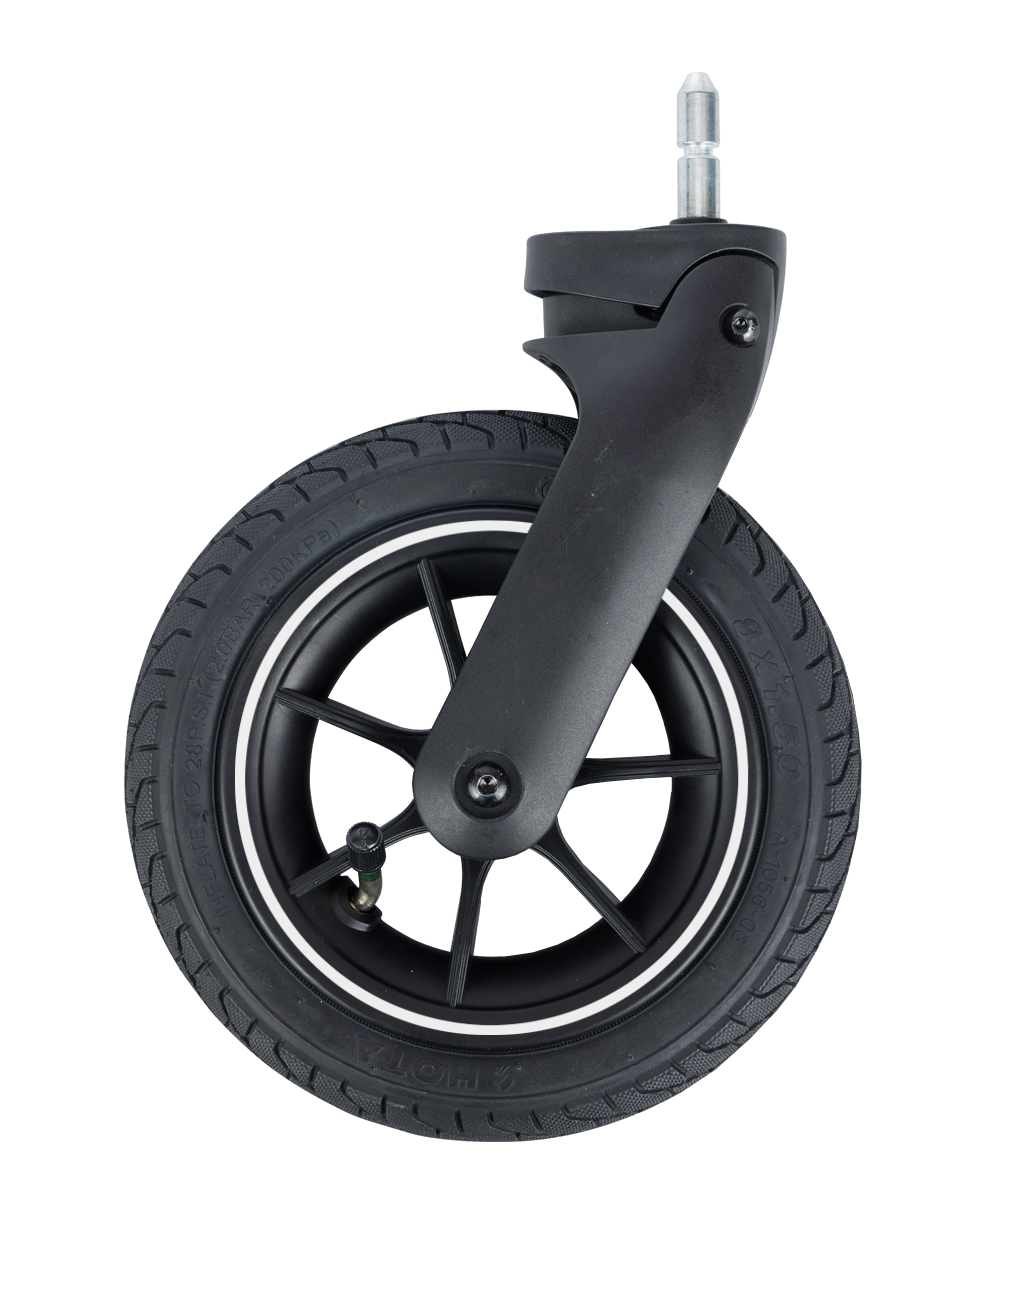 Front wheel and fork | Harvey⁵ Air and Harvey⁵ Premium Air